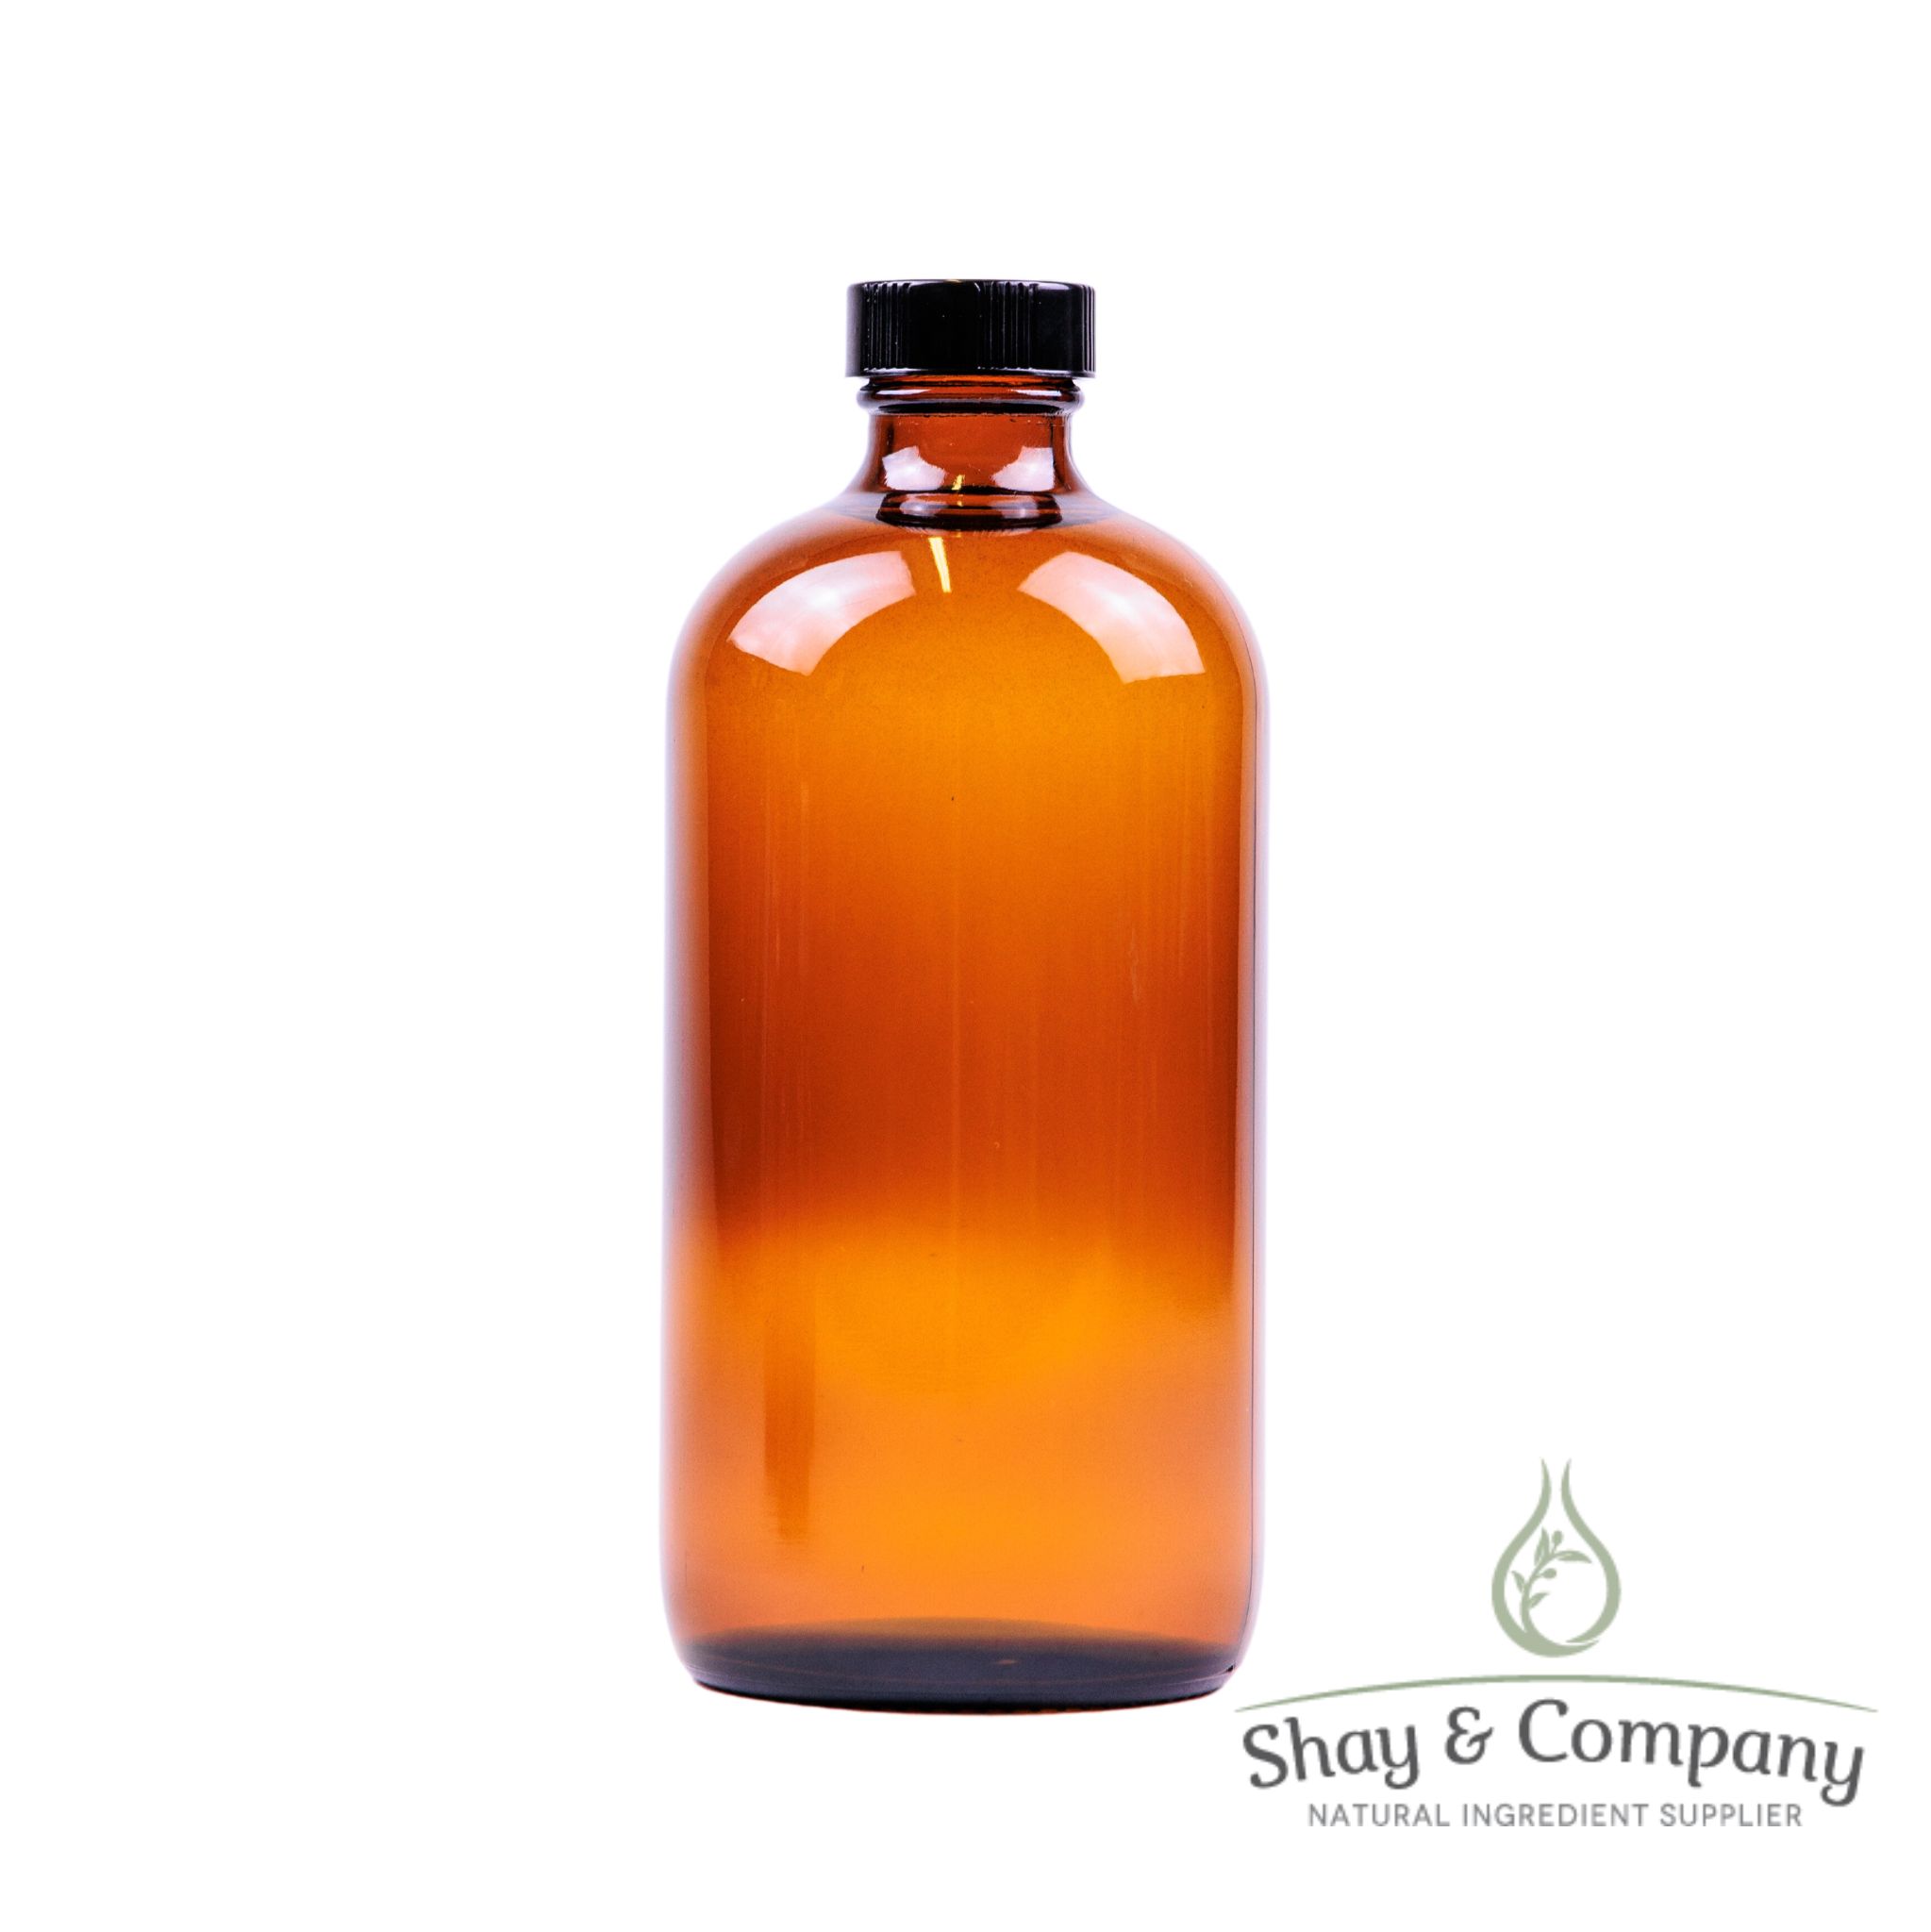 https://shayandcompany.com/wp-content/uploads/2018/09/packaging-16oz-amber-glass-bottle-with-black-lid.jpg